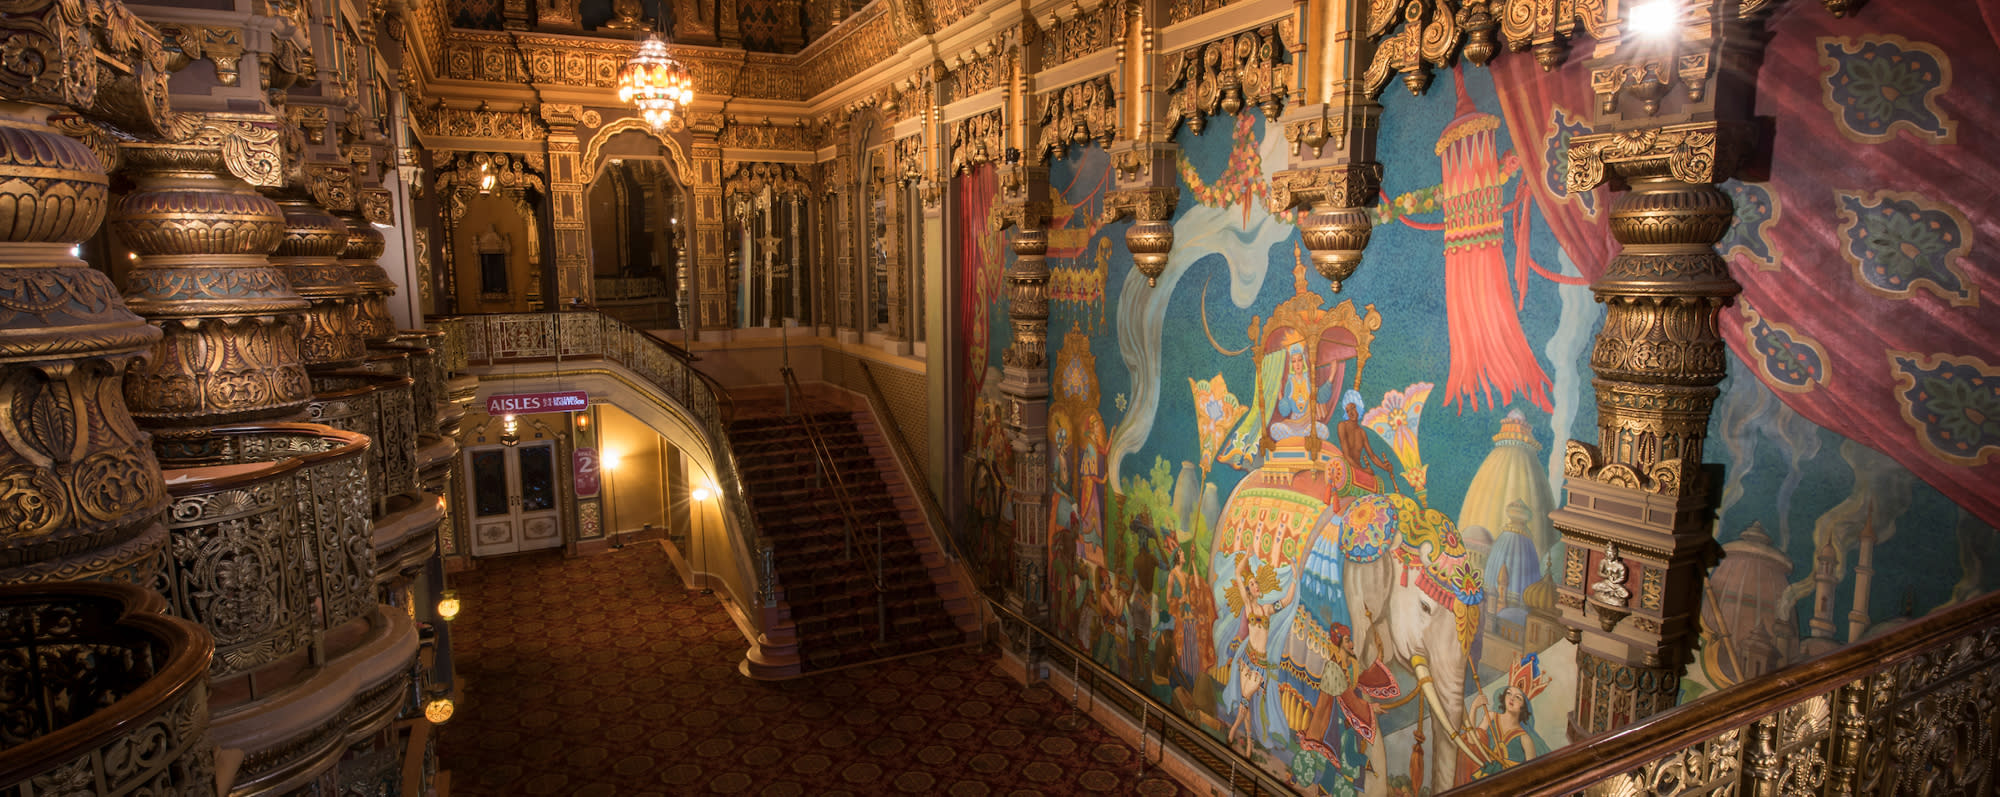 A photo of the inside architecture of the Landmark Theatre in Syracuse